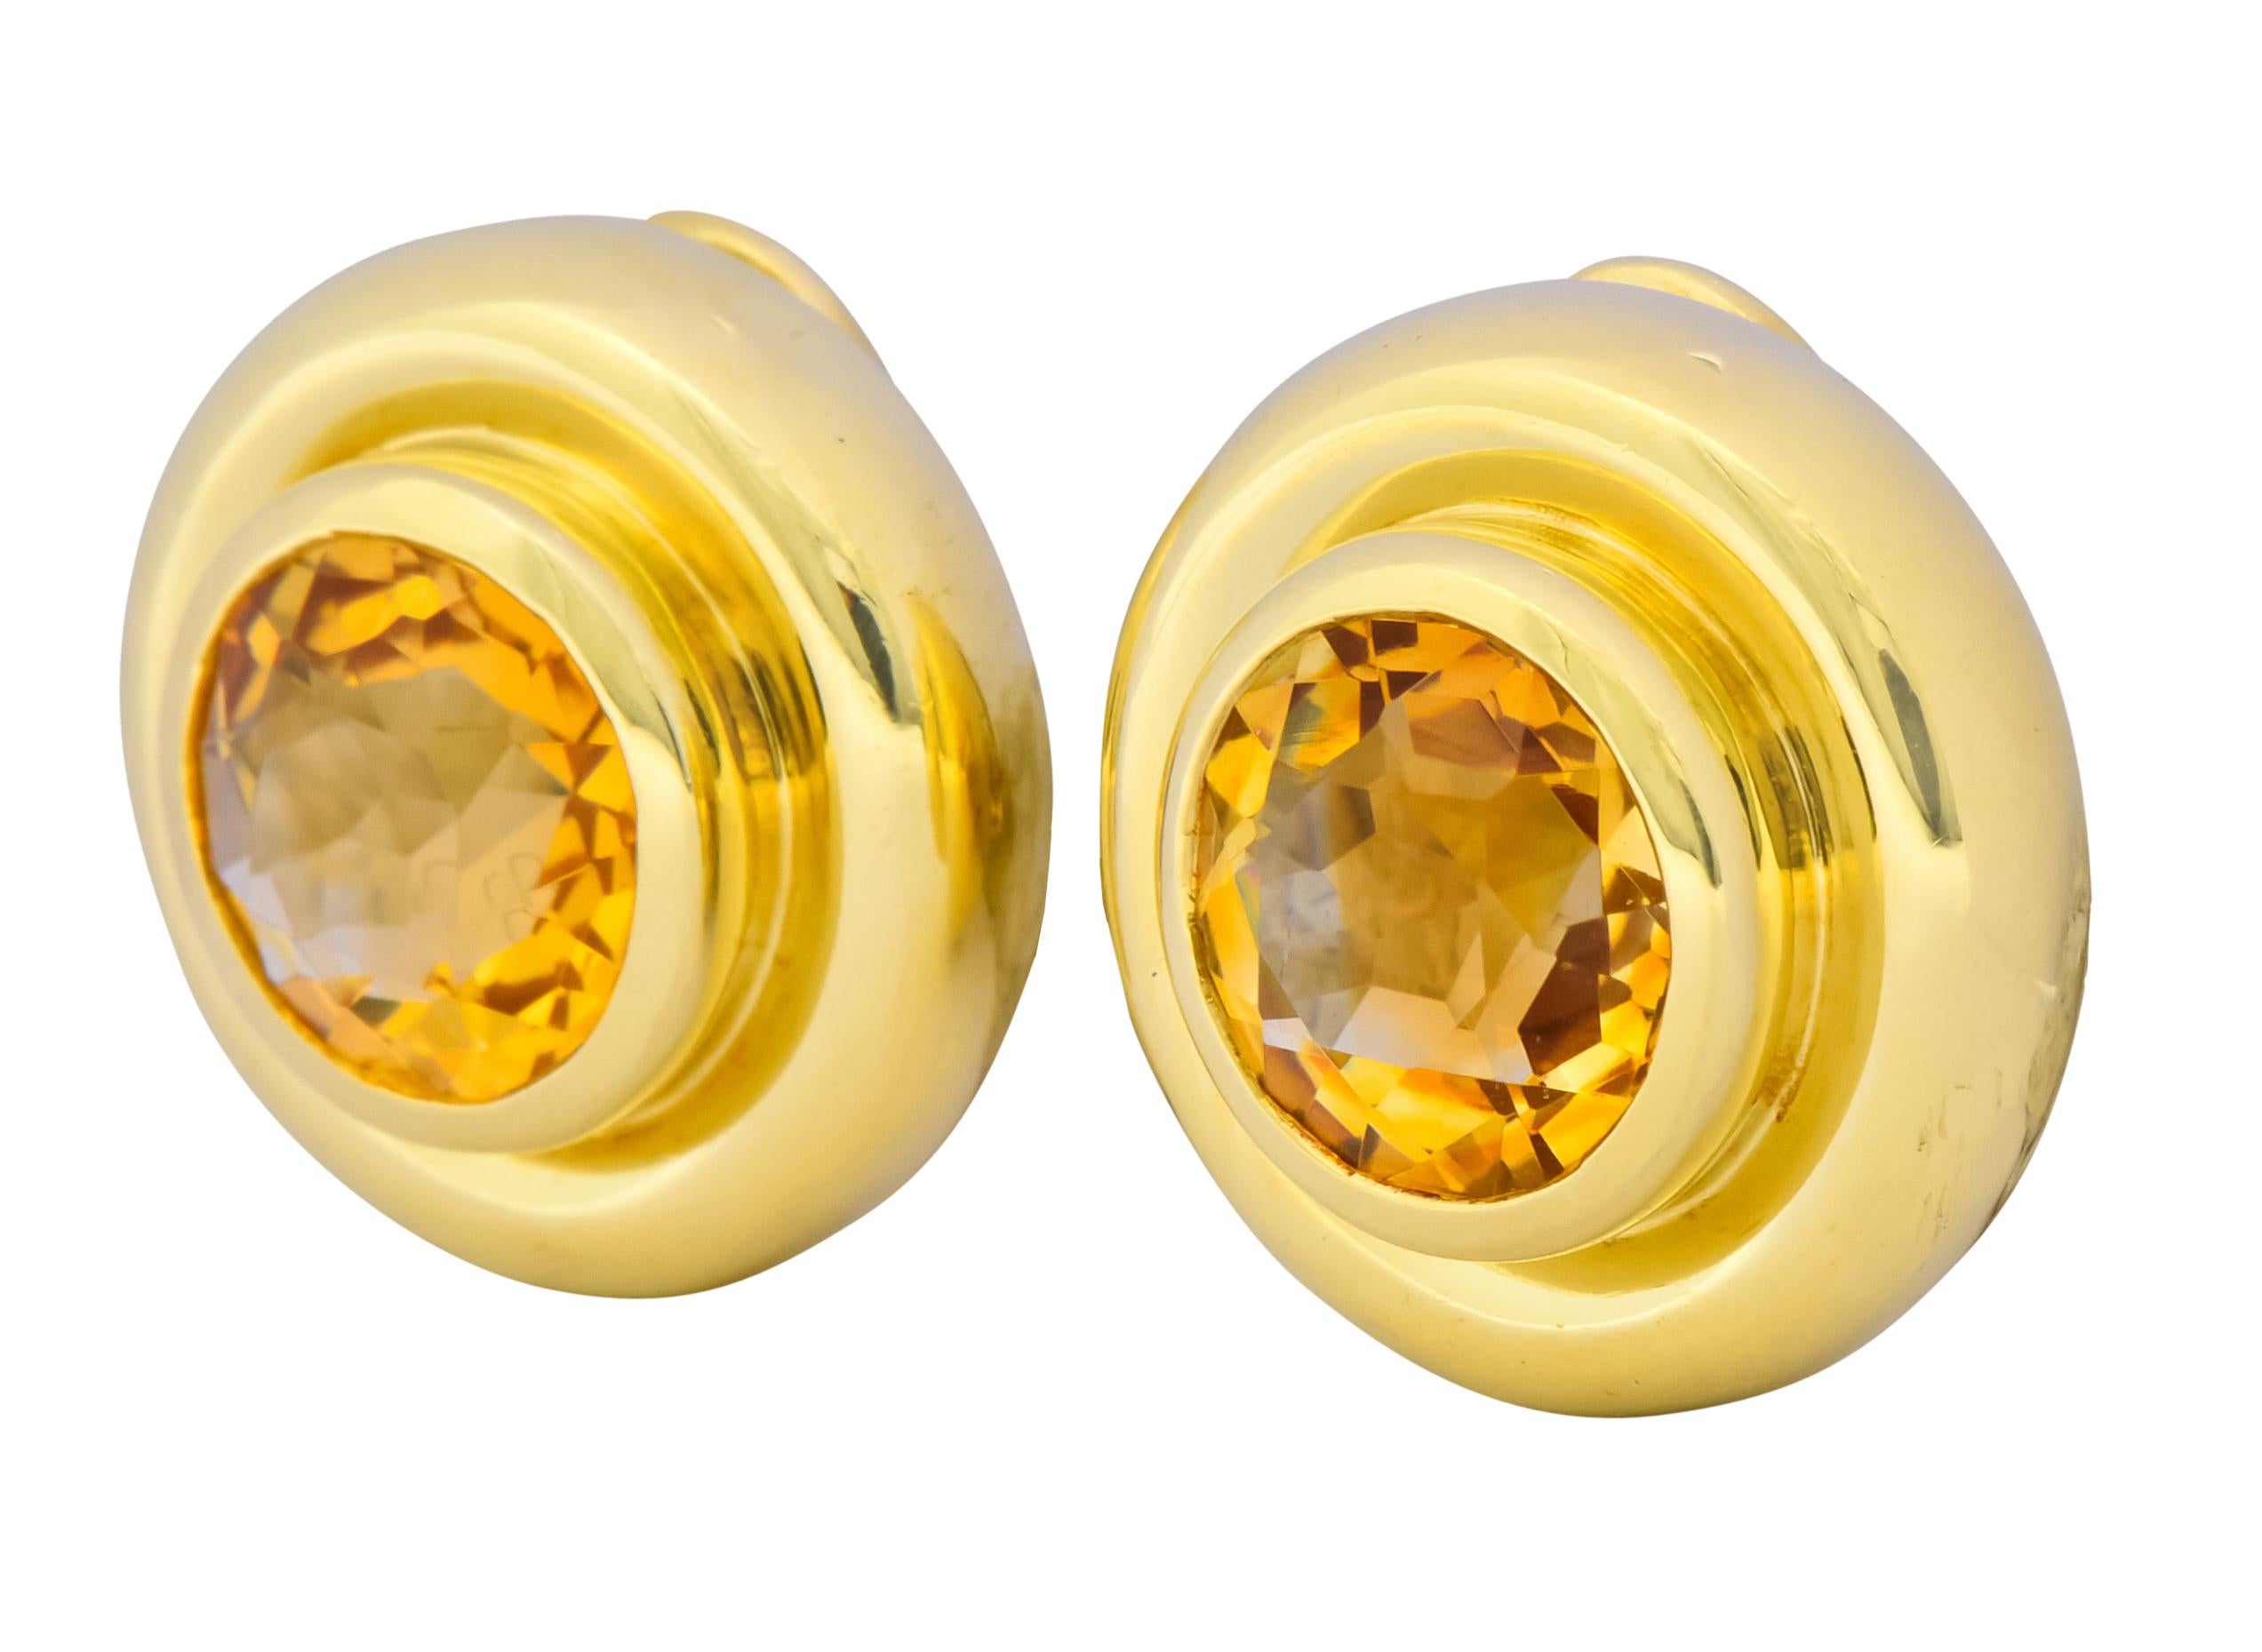 Each earring centers a round mixed cut citrine measuring approximately 10.4 mm, transparent and a warm orangey-yellow

Bezel set in a polished gold circular surround

Completed by hinged omega backs and posts

Fully signed Tiffany & Co. Paloma